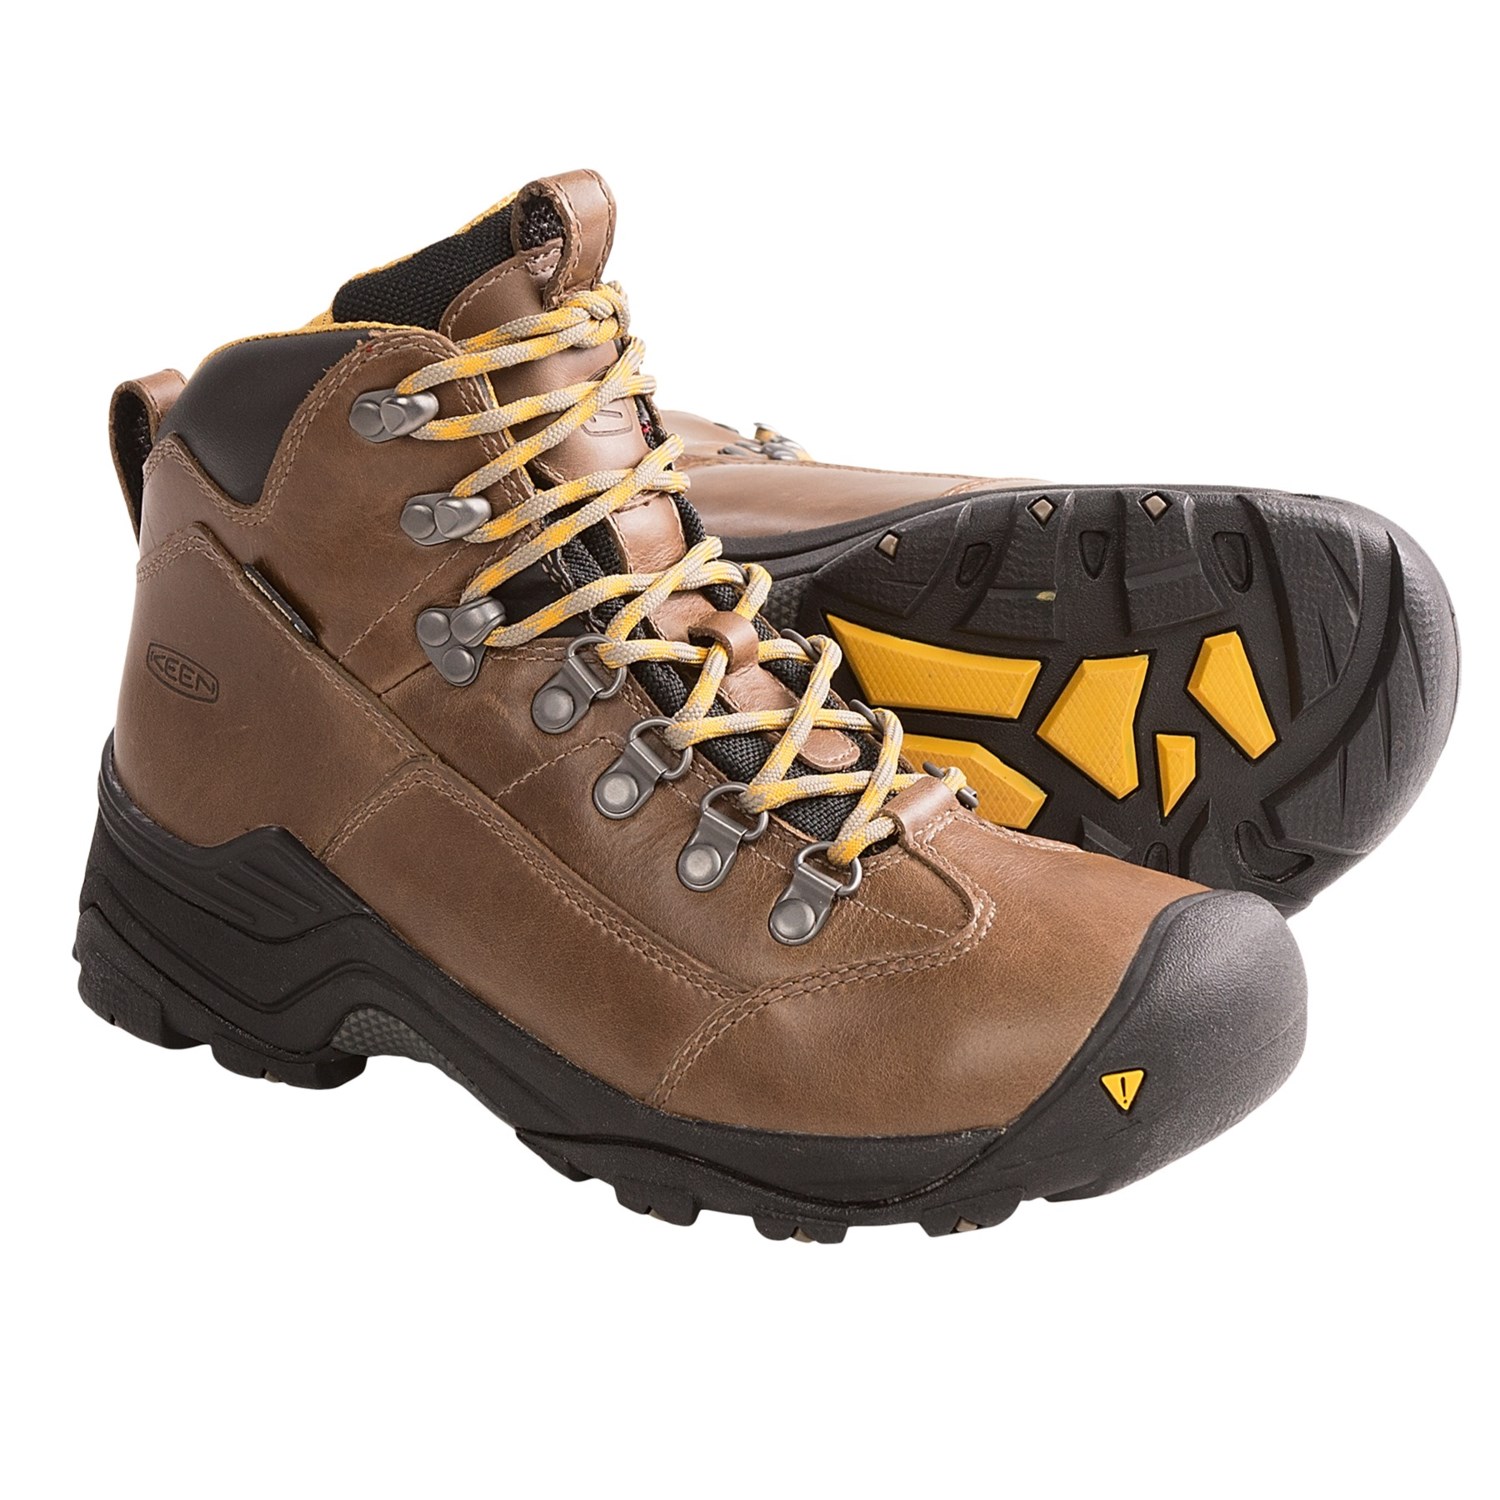 Keen Glarus Mid Hiking Boots (For Women) 6430G - Save 60%